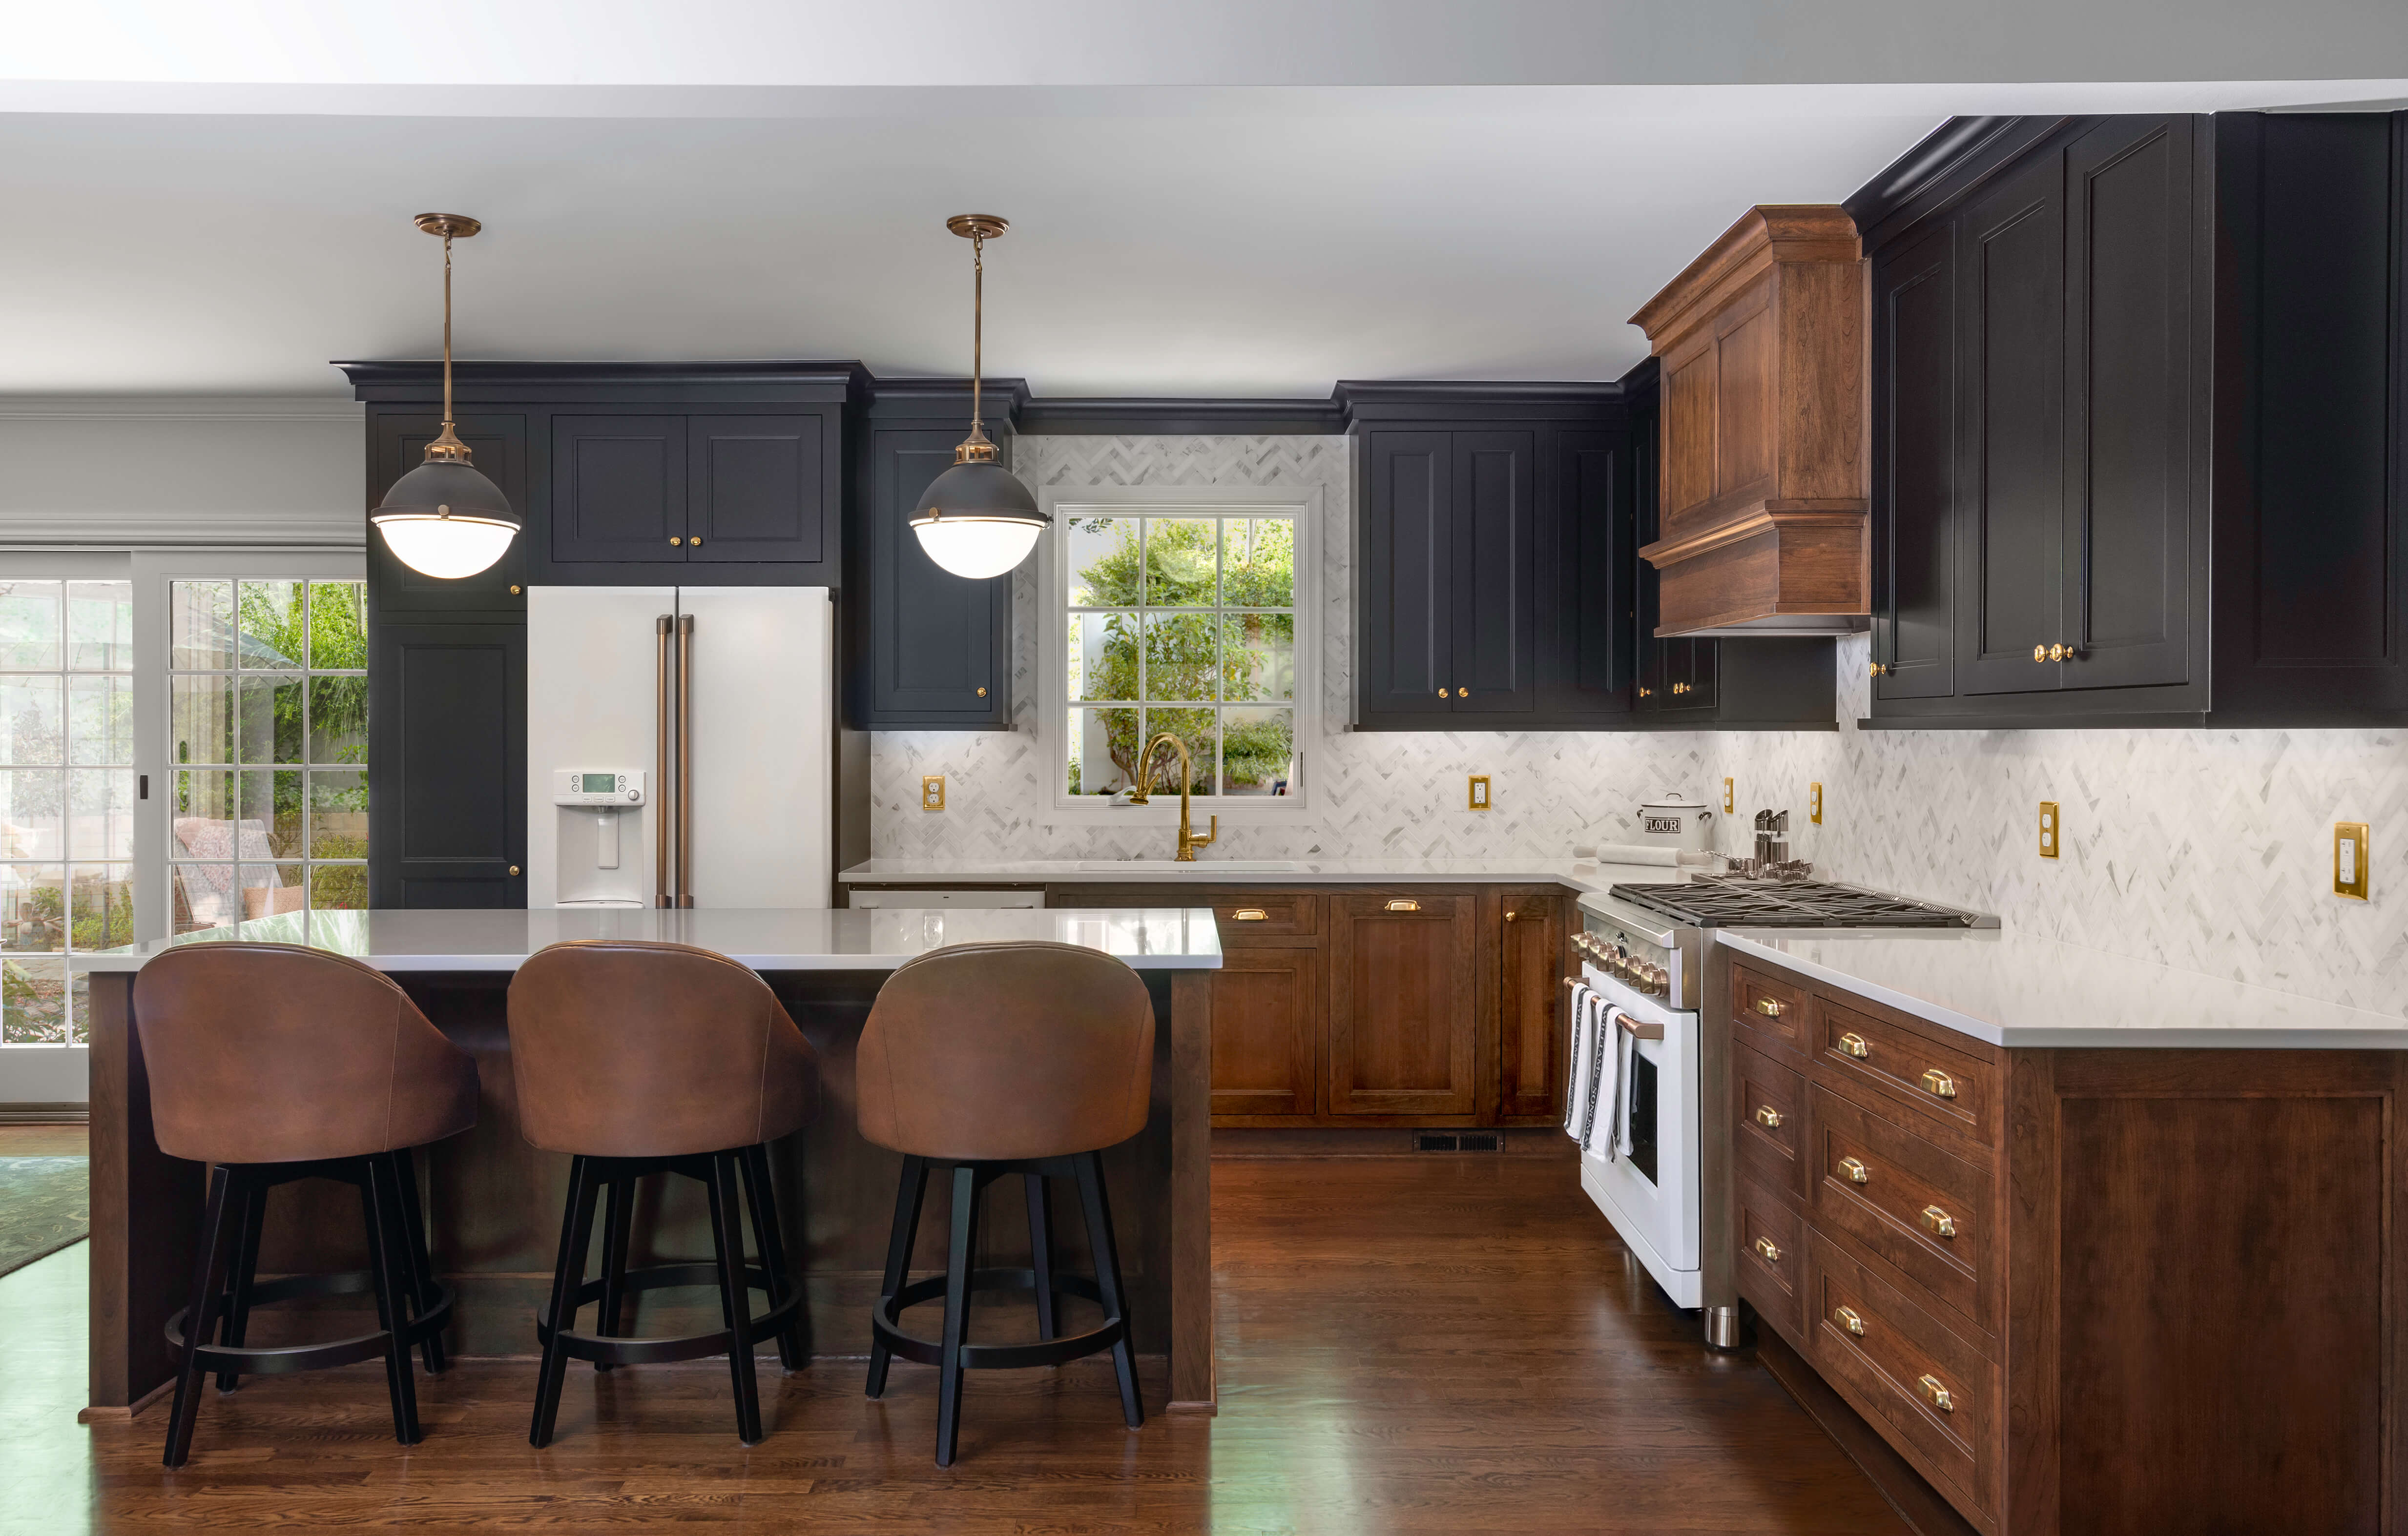 Black and Rich Cherry Wood Create a Romantic Kitchen Design in this newly remodeled kitchen in Virginia. Looking for something different than the white cabinets? Try black painted cabinets!